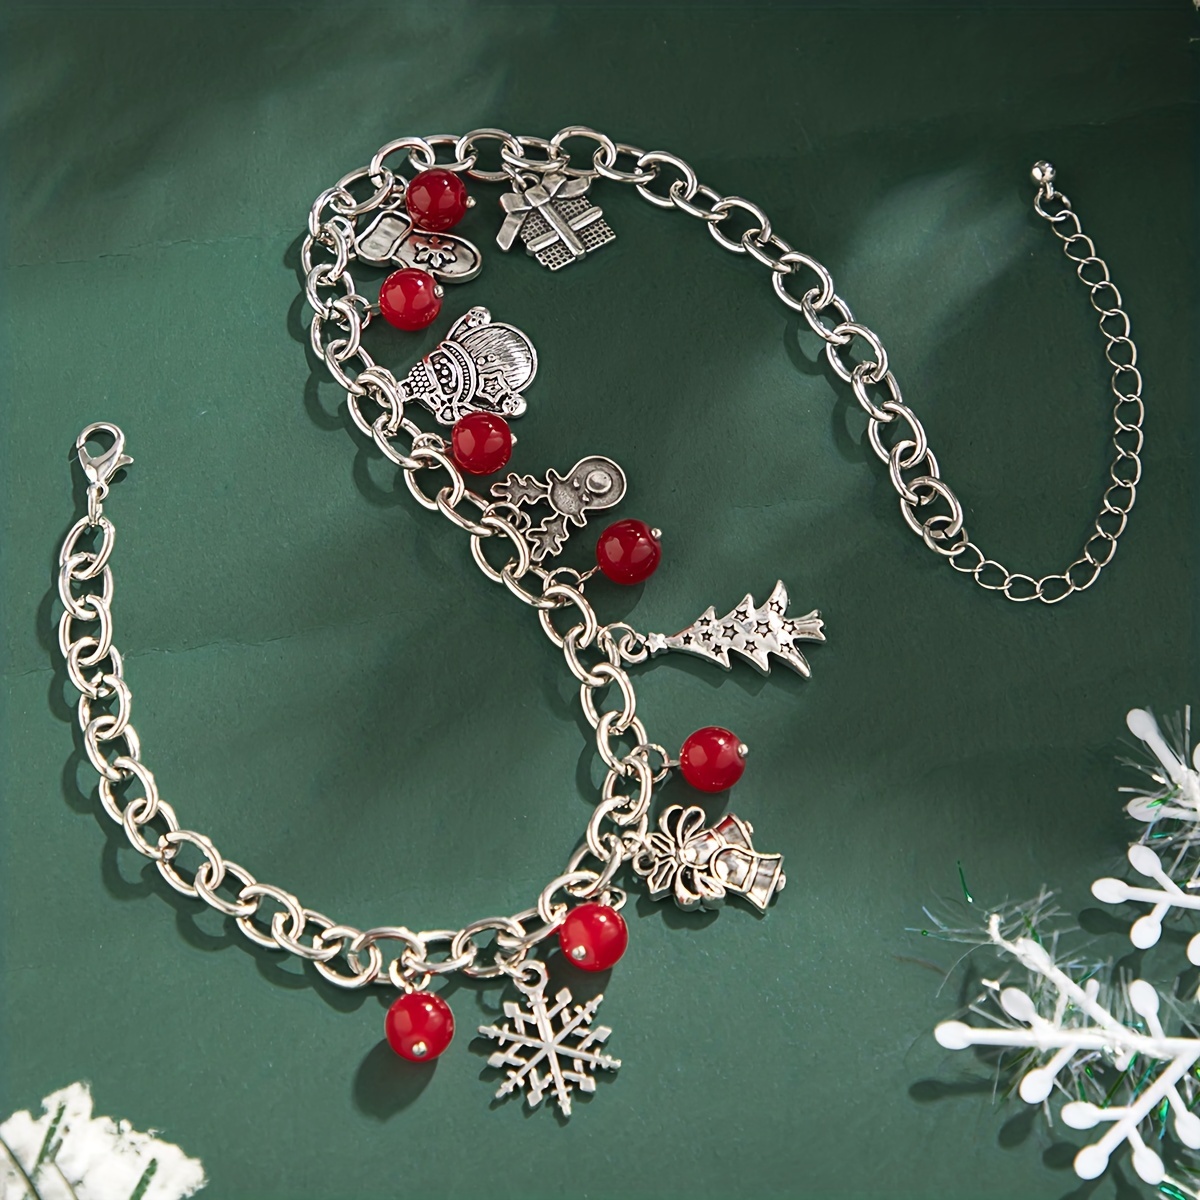 Retro Christmas Red Beads Snowflake Deer Christmas Decoration Chain Pendant Necklace